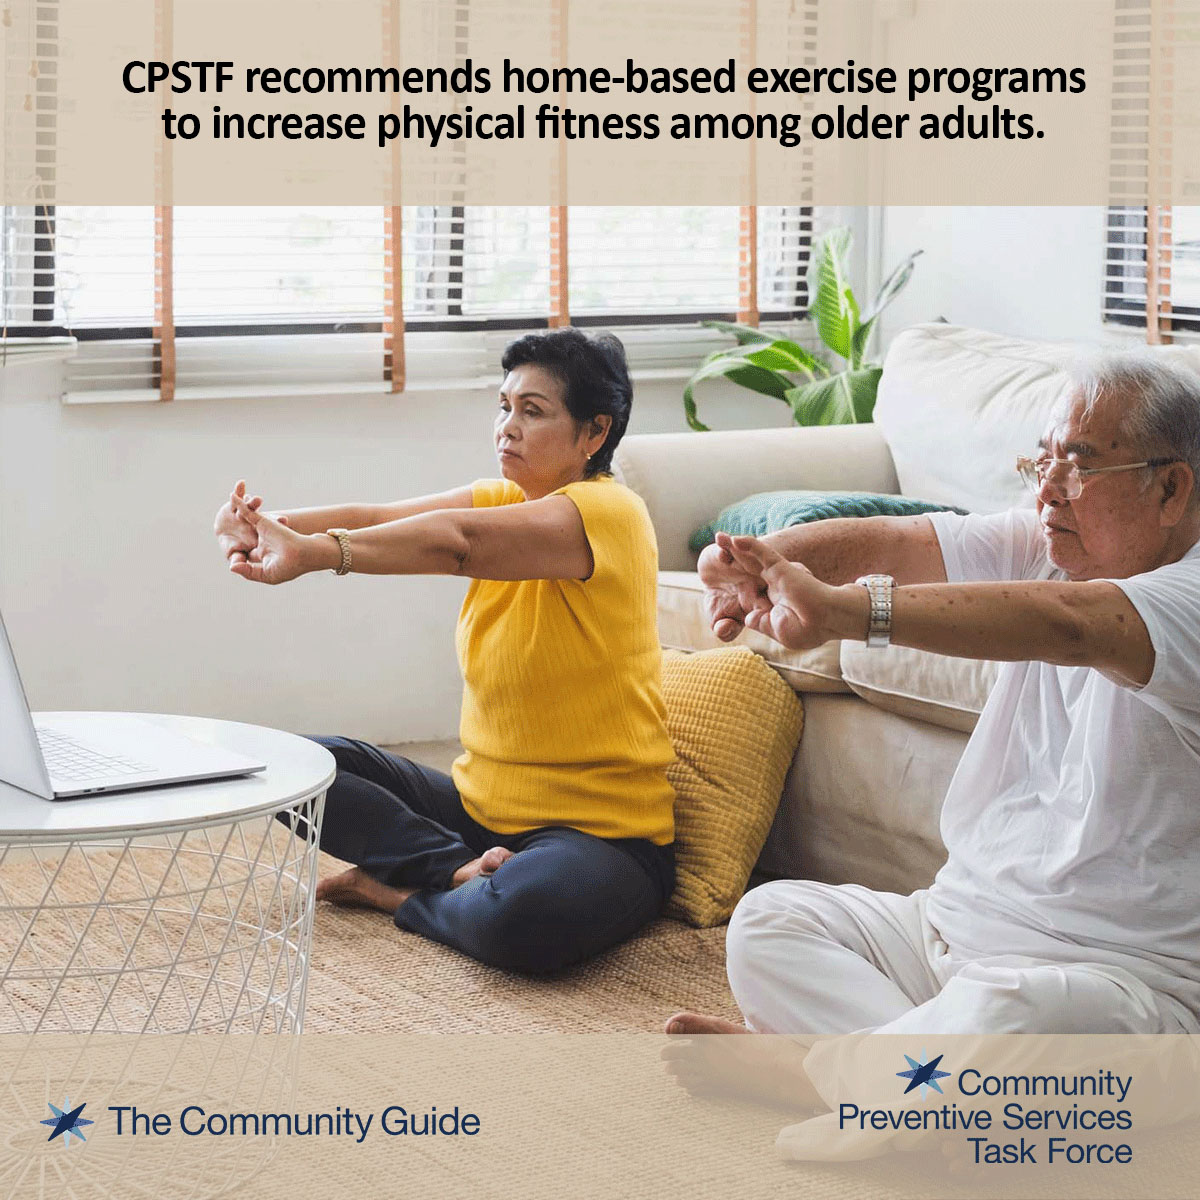 Use this image of an older Asian couple exercising to promote the CPSTF finding for Home-based Exercise Interventions for Adults Aged 65 years and Older on your social media accounts.